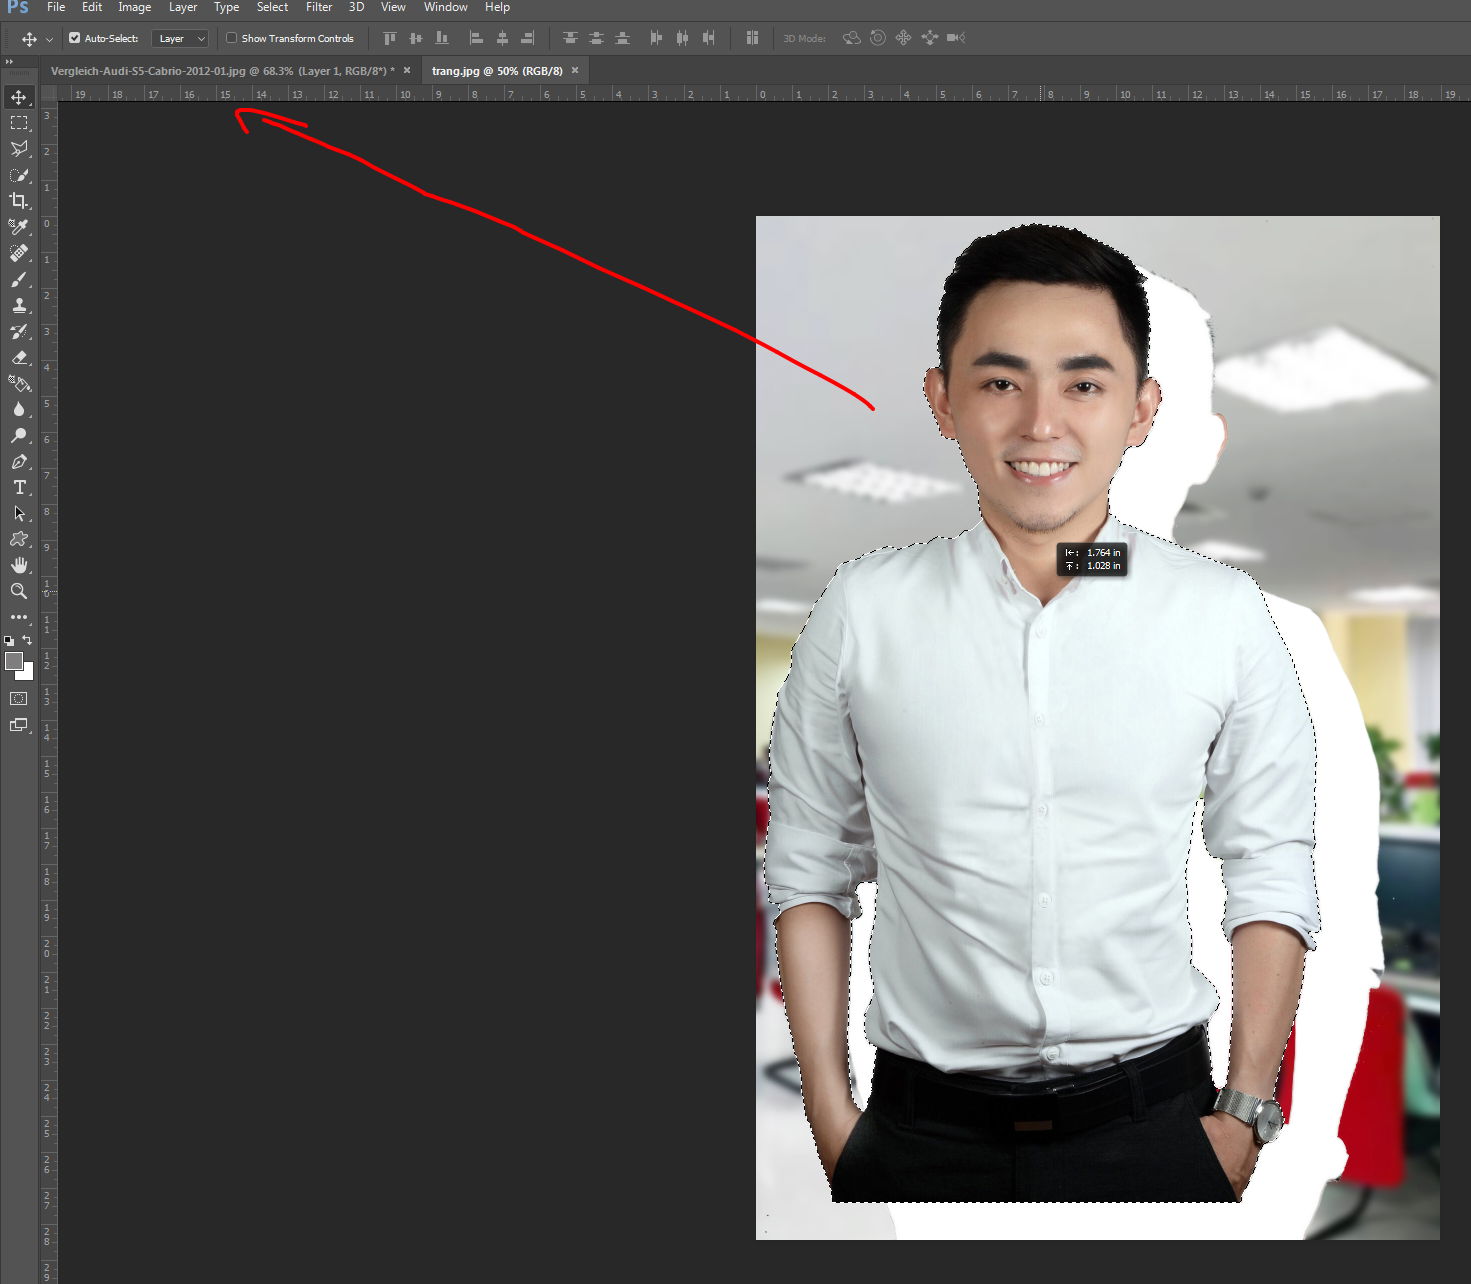 su dung movie tool de cat ghep hinh anh trong photoshop